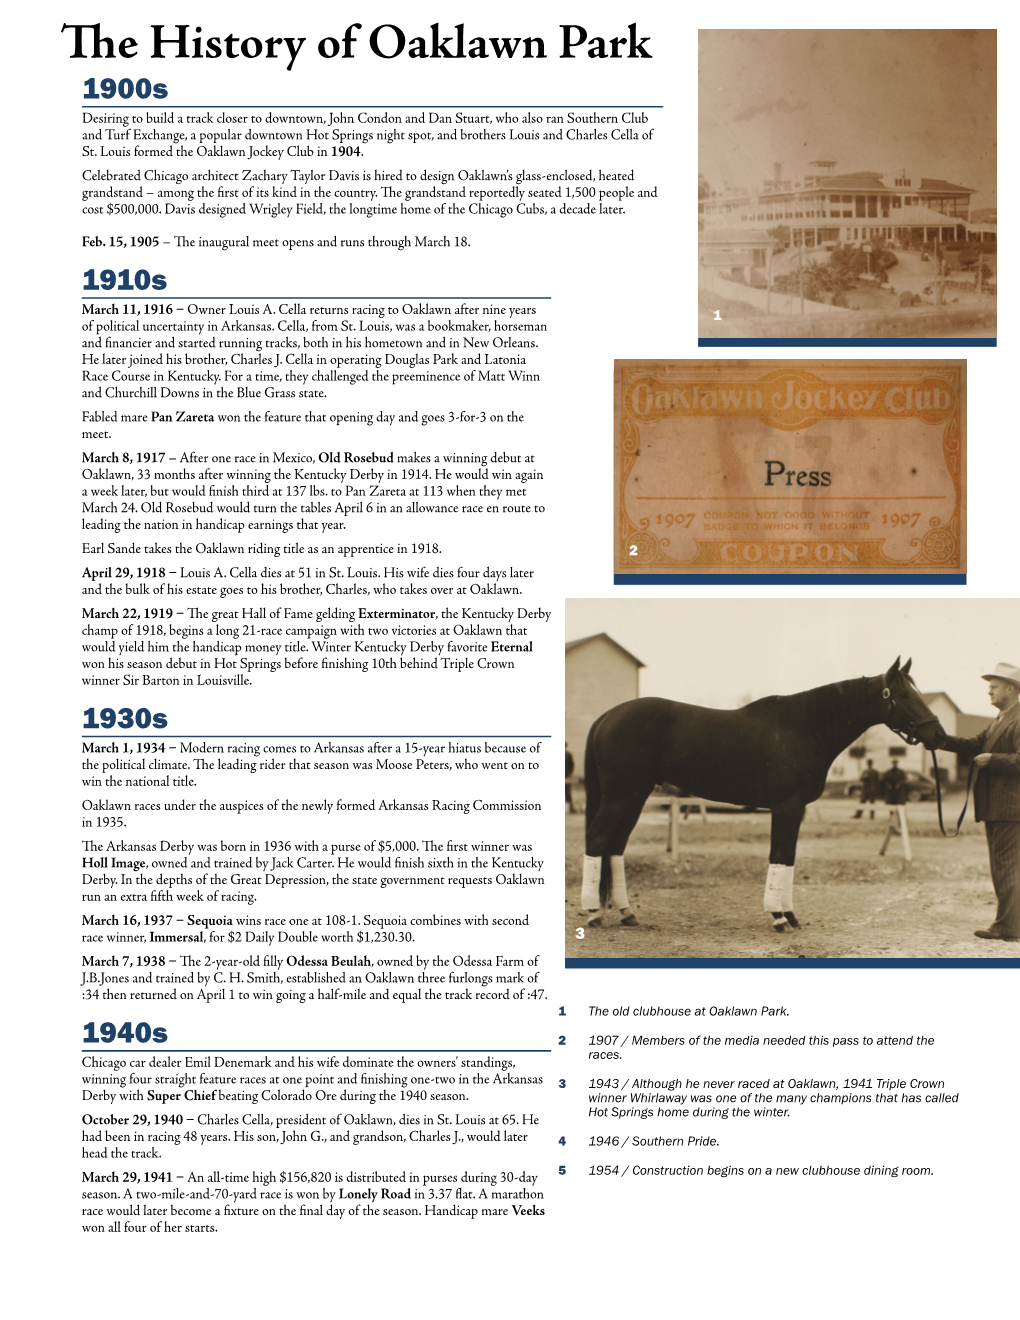 The History of Oaklawn Park